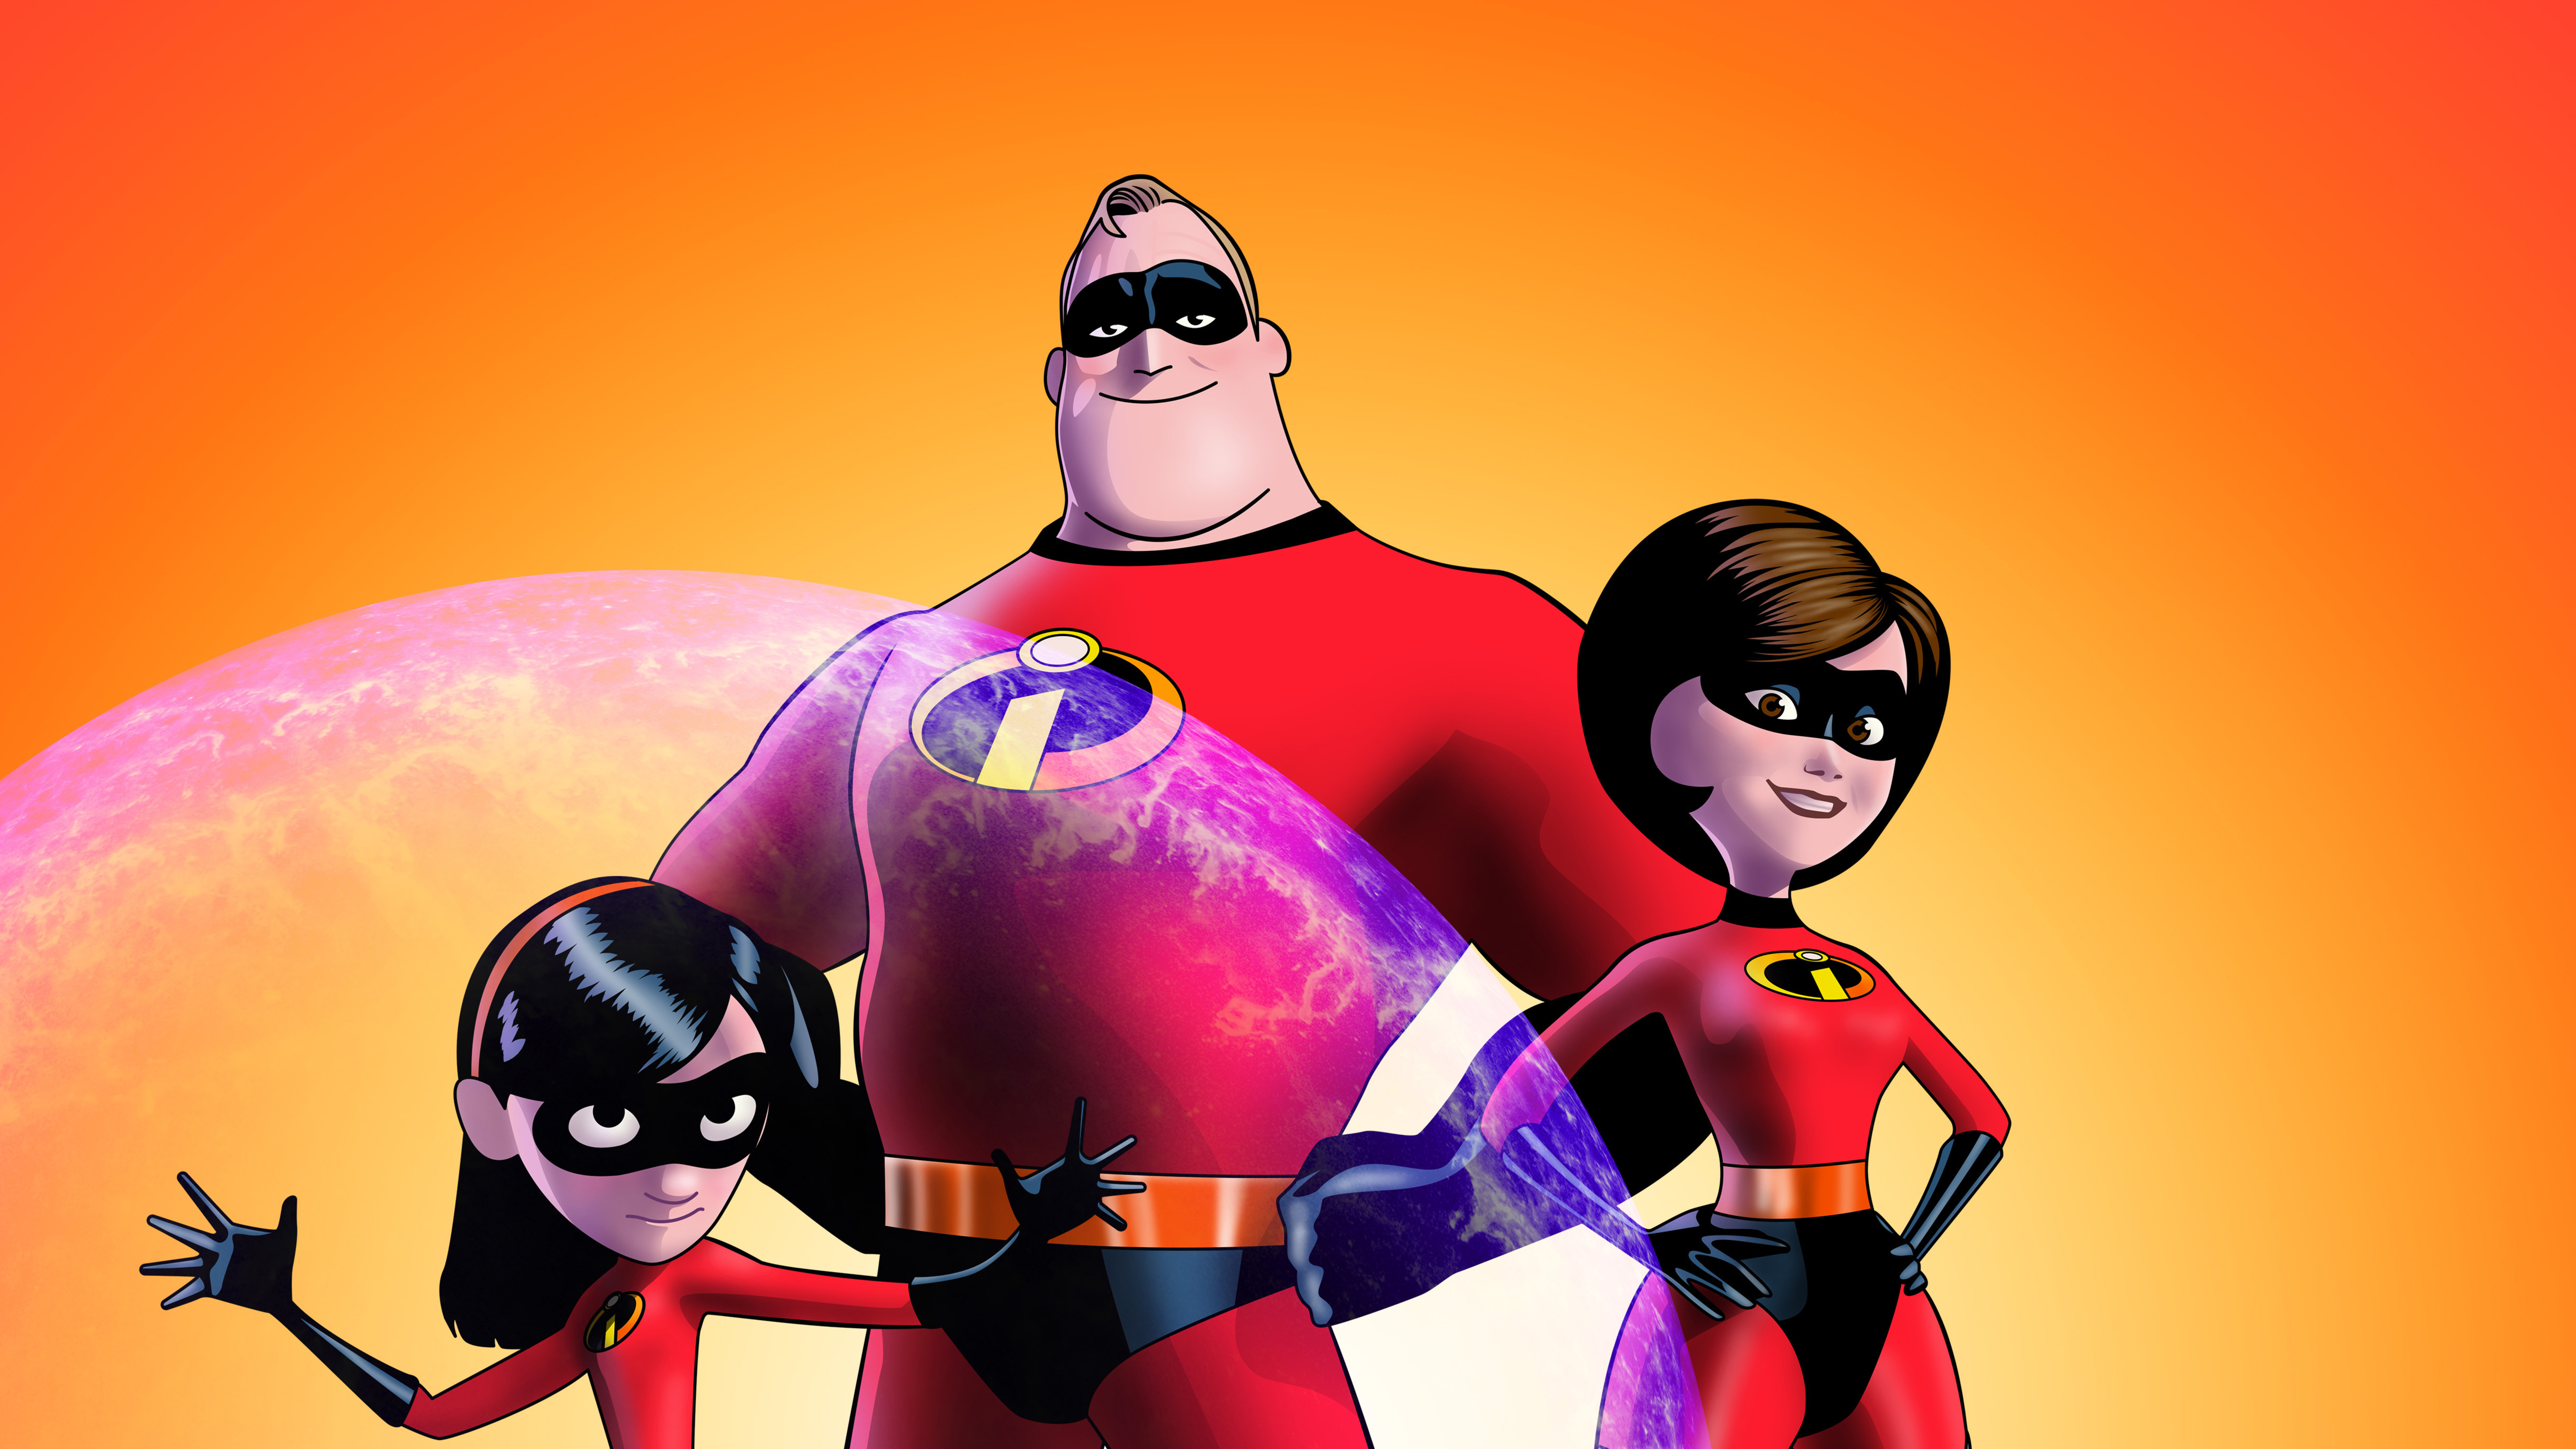 The Incredibles 2 5k Artwork In 5120x2880 Resolution. the-incredibles-2-5k-...